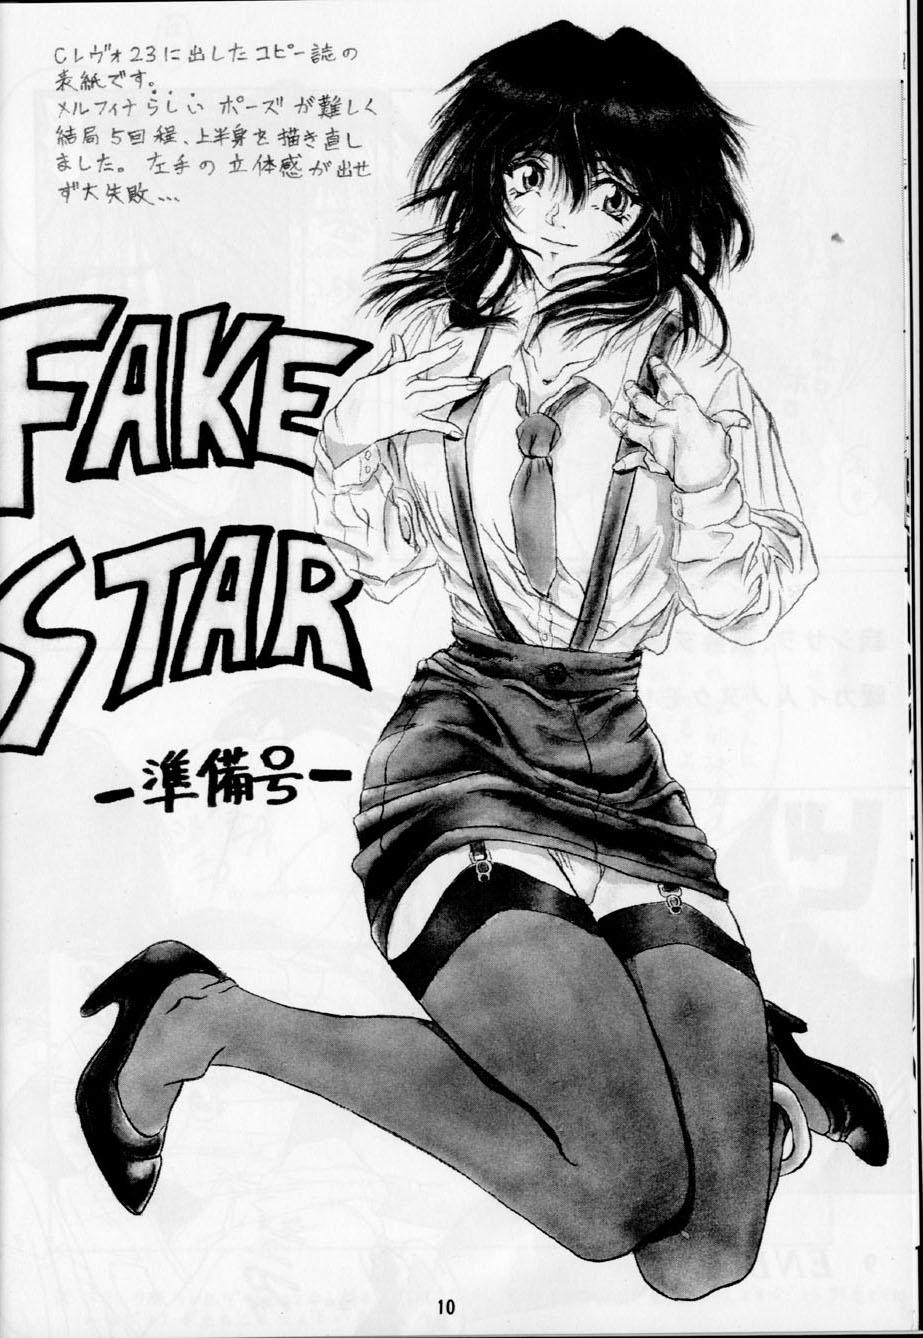 Slave Fake Star - Outlaw star Ejaculation - Page 9